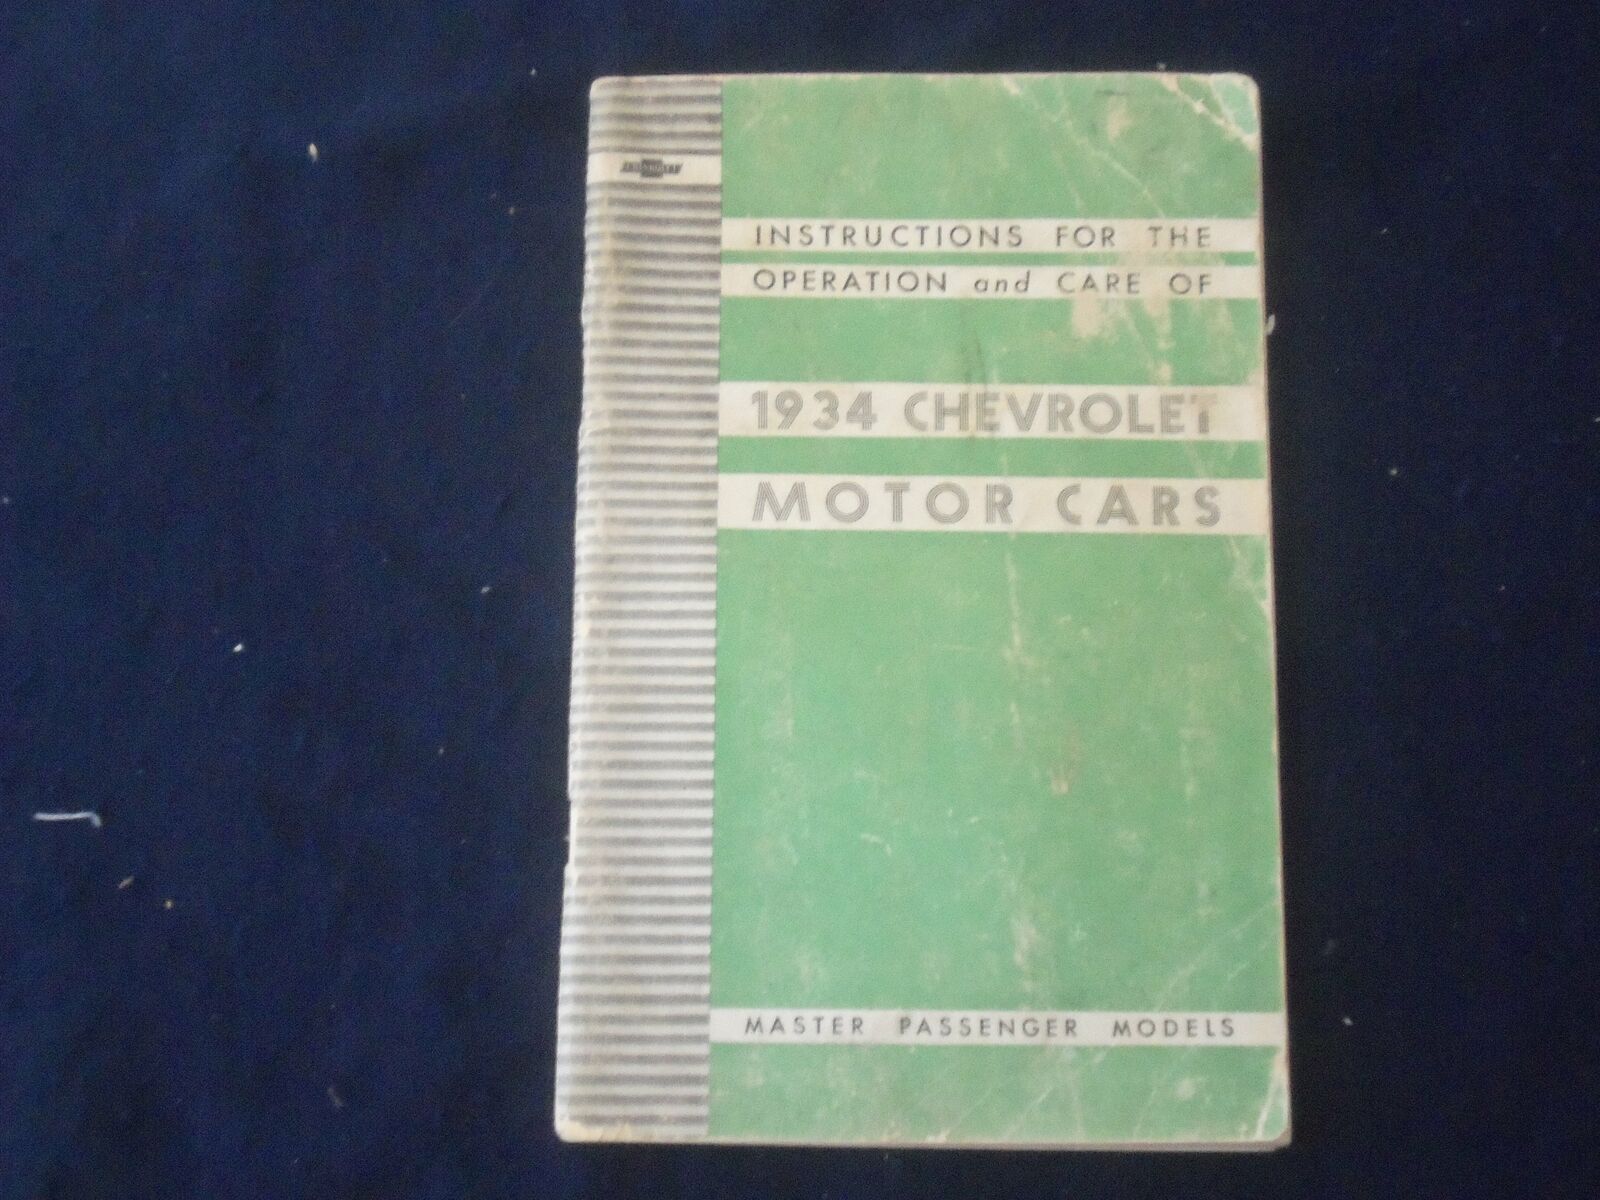 1934 CHEVROLET MOTOR CARS INSTRUCTIONS FOR THE OPERATION AND CARE OF - J 6490